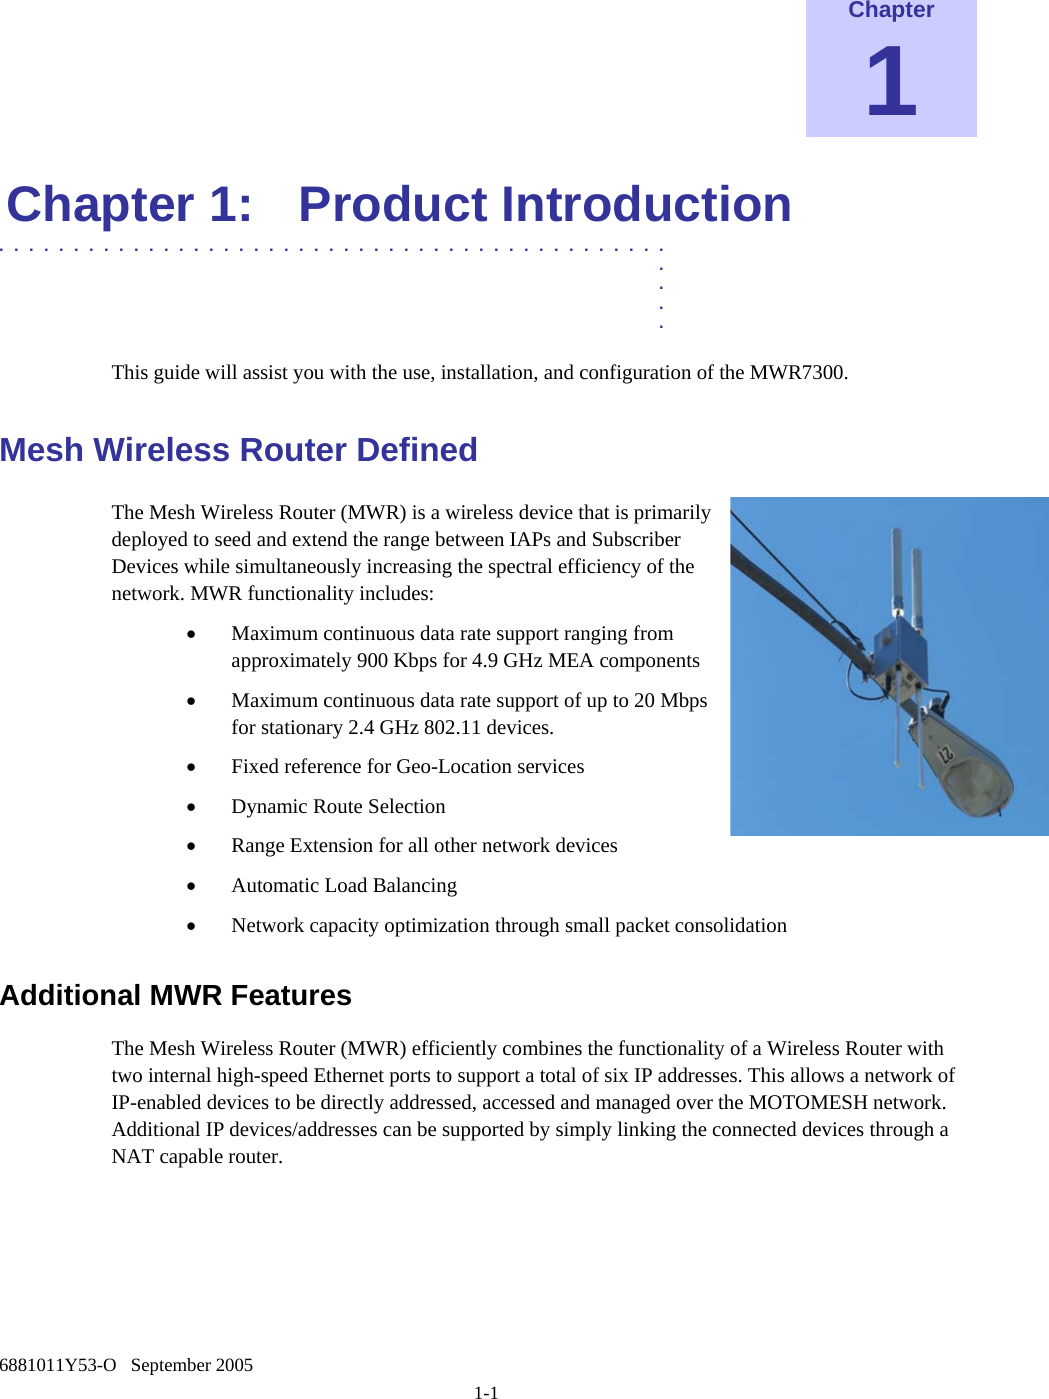    6881011Y53-O   September 2005 1-1 Chapter 1 Chapter 1:  Product Introduction  .............................................  .  .  .  . This guide will assist you with the use, installation, and configuration of the MWR7300. Mesh Wireless Router Defined The Mesh Wireless Router (MWR) is a wireless device that is primarily deployed to seed and extend the range between IAPs and Subscriber Devices while simultaneously increasing the spectral efficiency of the network. MWR functionality includes: • Maximum continuous data rate support ranging from approximately 900 Kbps for 4.9 GHz MEA components • Maximum continuous data rate support of up to 20 Mbps for stationary 2.4 GHz 802.11 devices. • Fixed reference for Geo-Location services • Dynamic Route Selection • Range Extension for all other network devices • Automatic Load Balancing • Network capacity optimization through small packet consolidation Additional MWR Features The Mesh Wireless Router (MWR) efficiently combines the functionality of a Wireless Router with two internal high-speed Ethernet ports to support a total of six IP addresses. This allows a network of IP-enabled devices to be directly addressed, accessed and managed over the MOTOMESH network. Additional IP devices/addresses can be supported by simply linking the connected devices through a NAT capable router.    